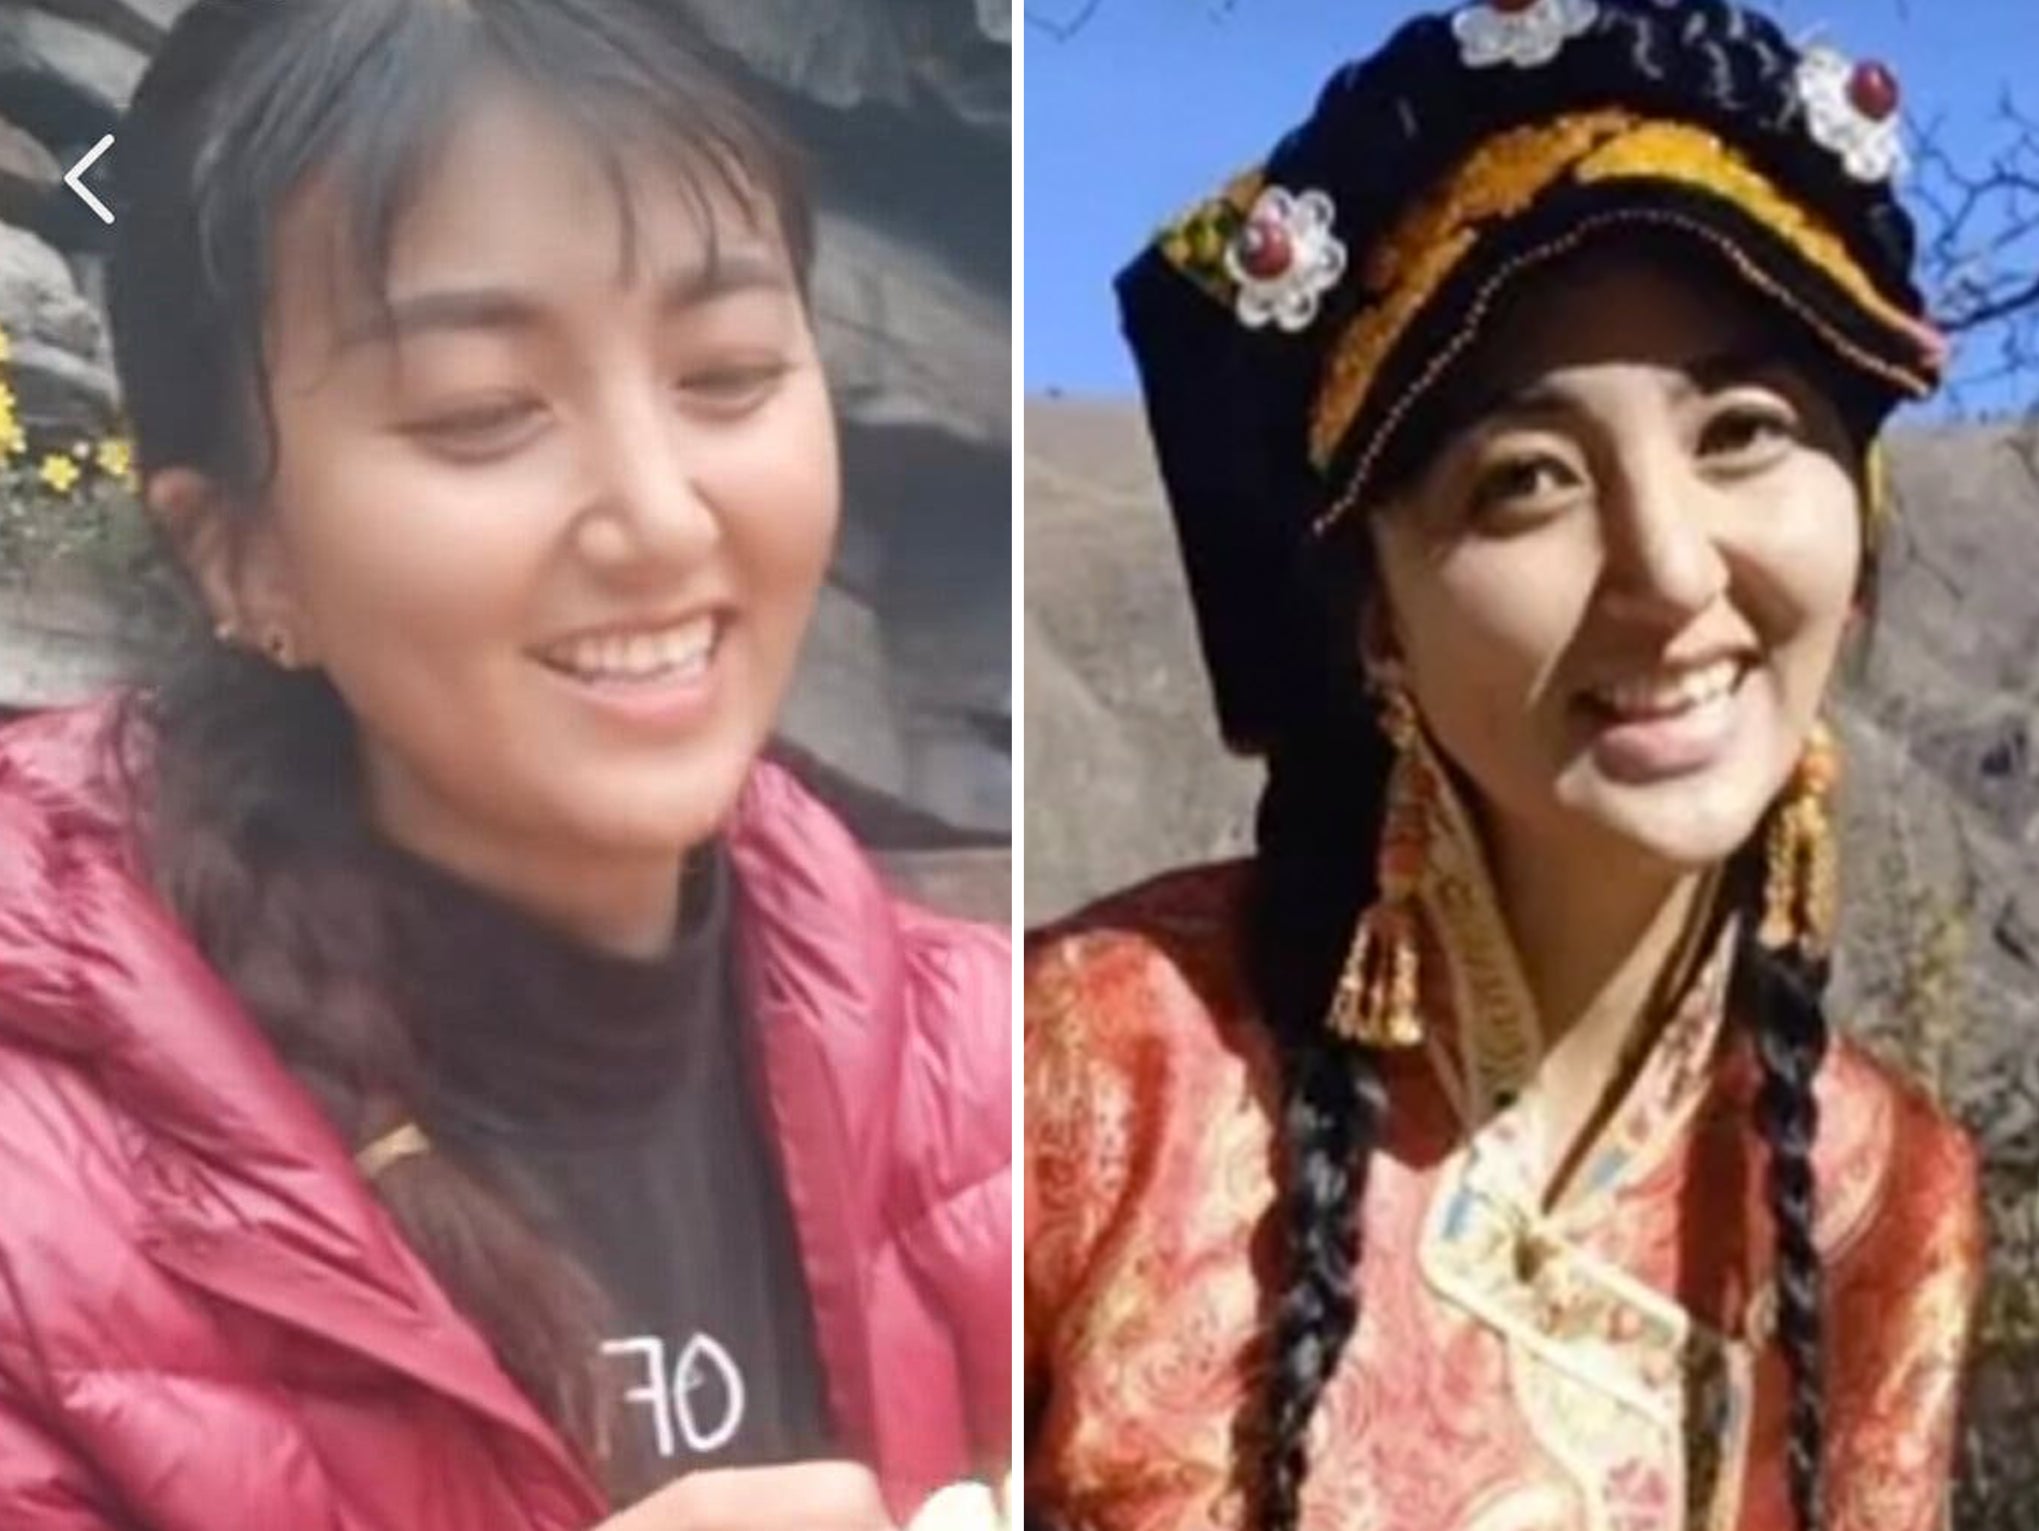 Lhamo had thousands of followers thanks to her videos